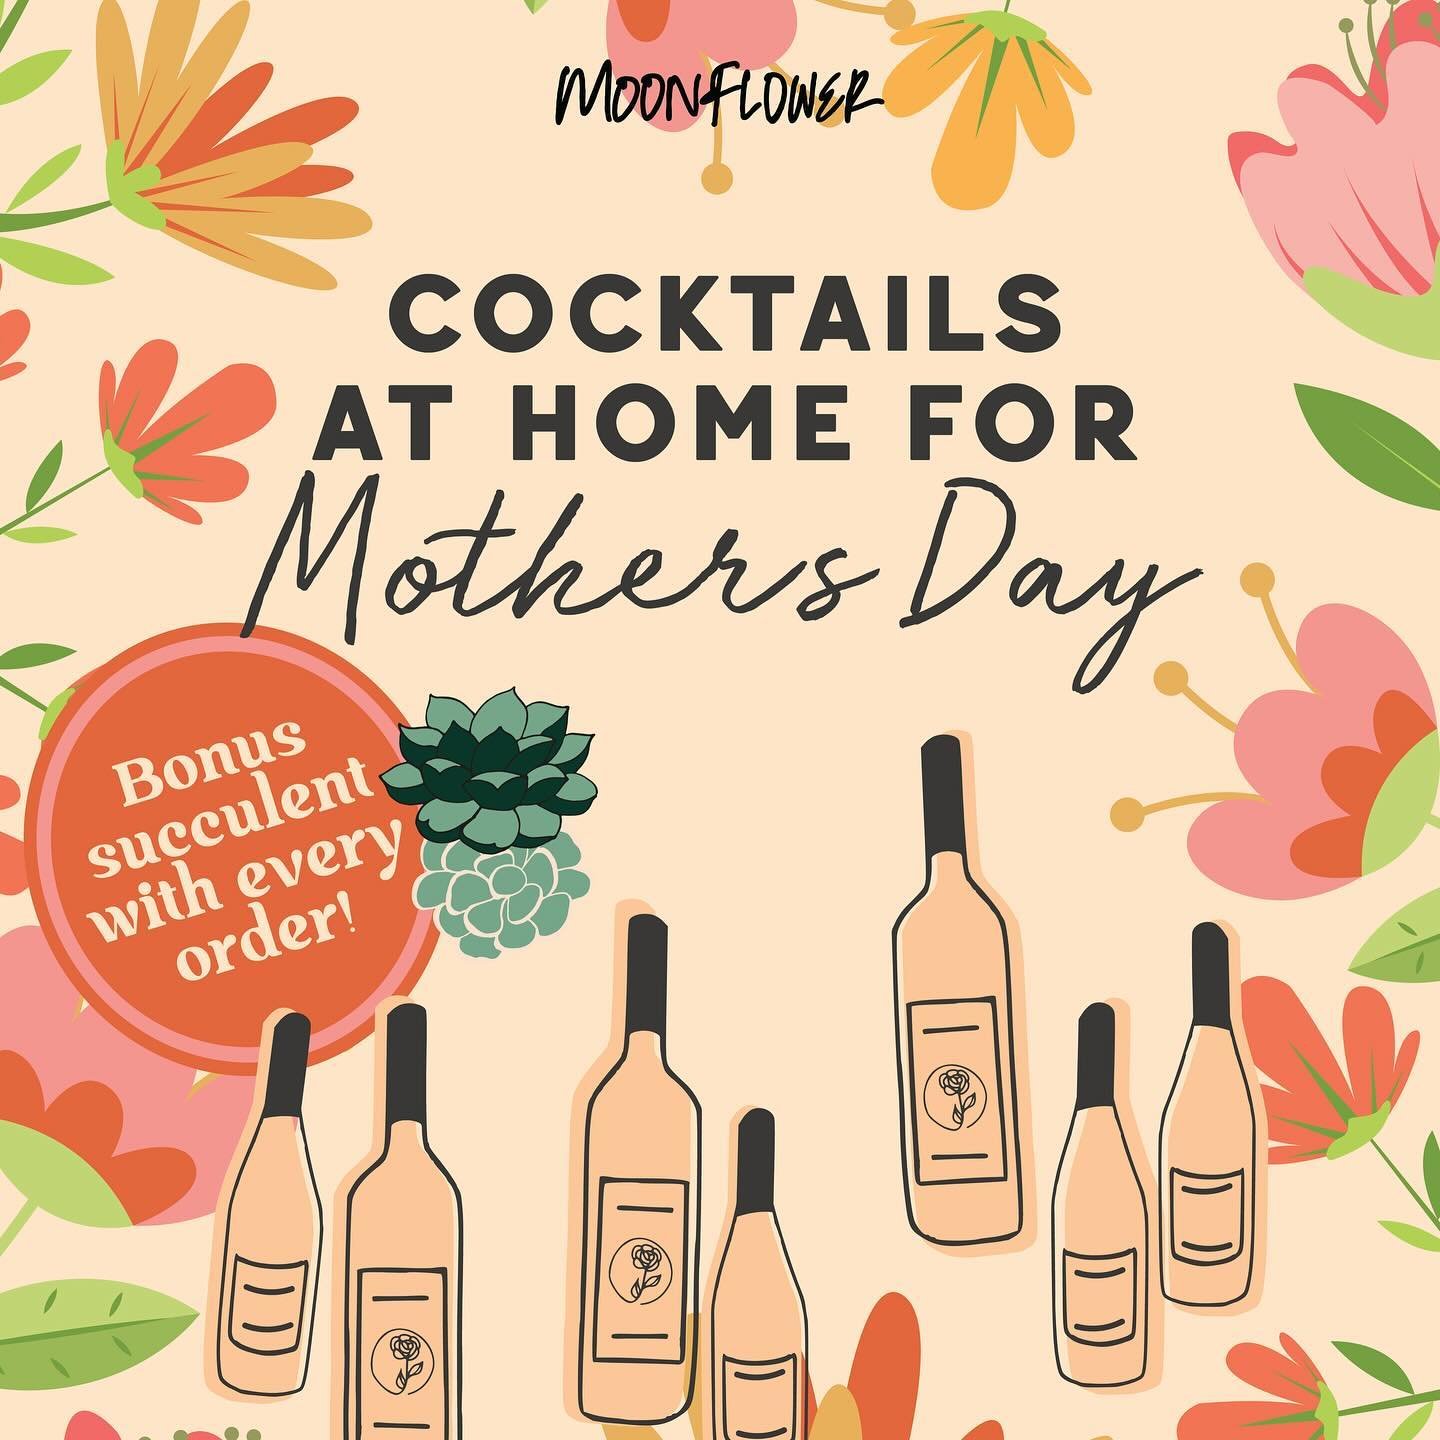 🌬️For Mother&rsquo;s Day, our To-Go cocktails are coming in clutch! With every order, we&rsquo;re giving away a succulent as a little extra surprise :) Swipe for the 2go menu and order now until 5/7 via DM or email at info@moonflowerbar.com ❣️